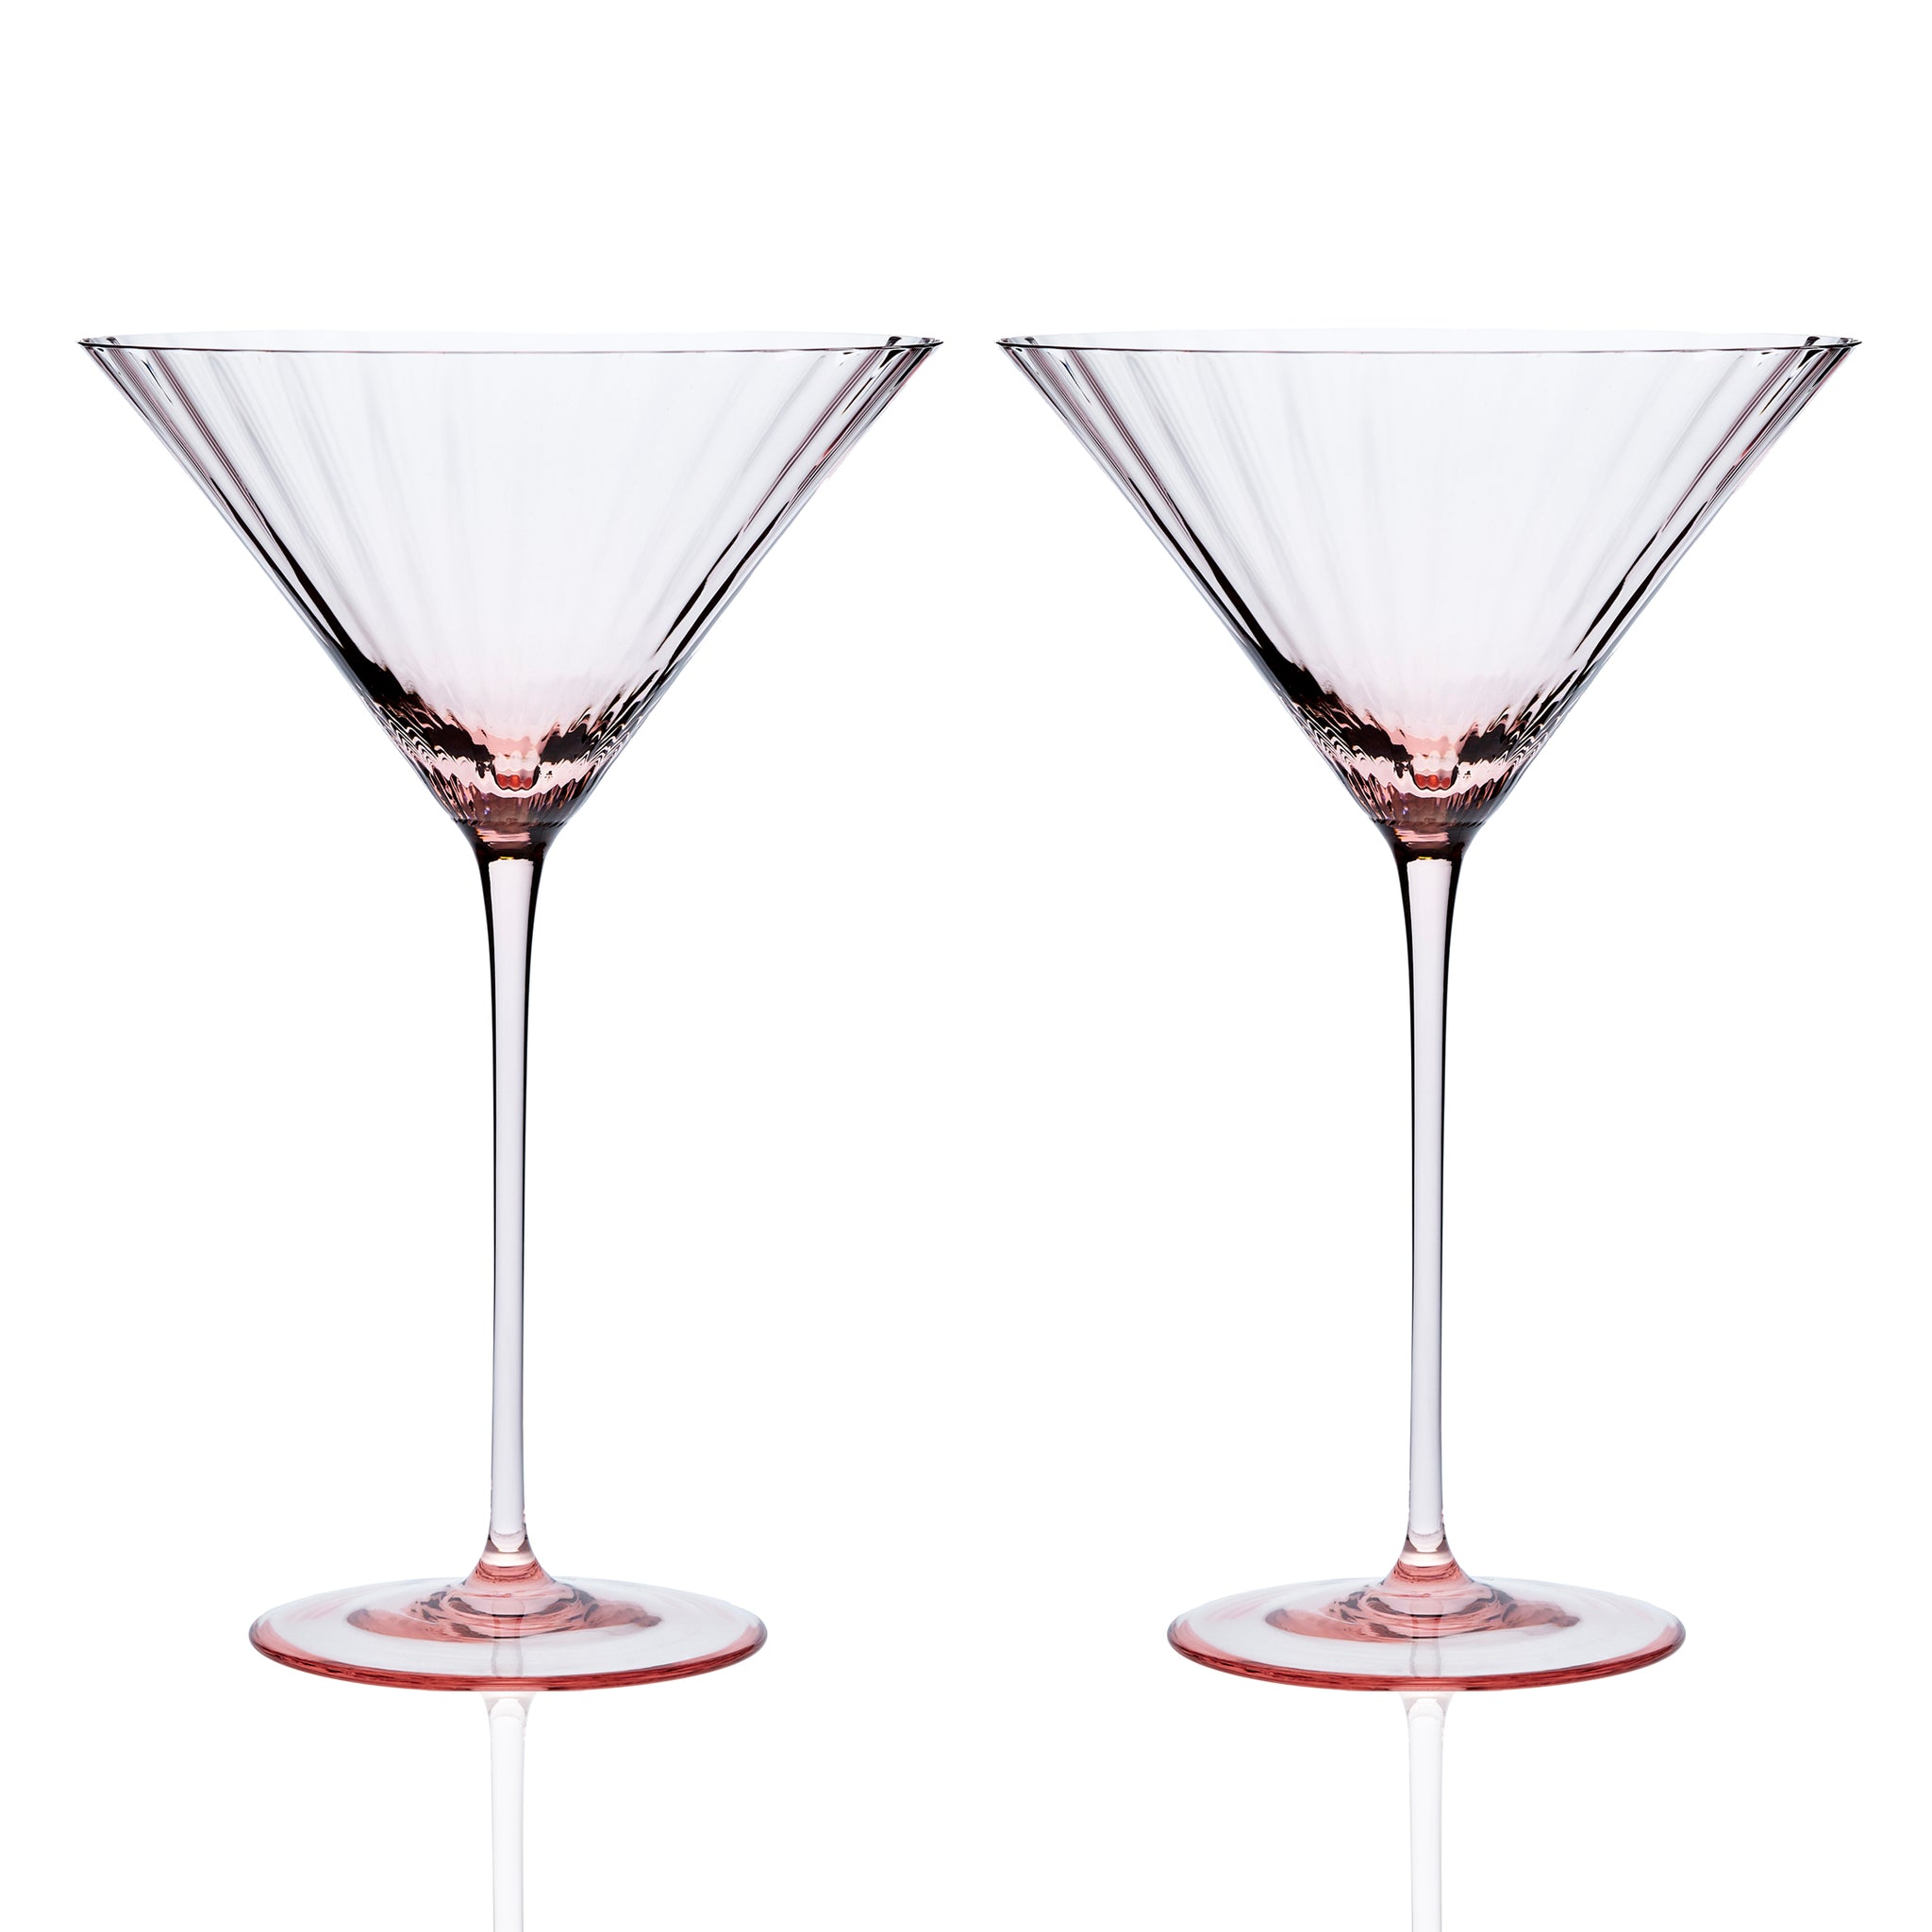 Trendy Wholesale martini glass holder of All Sizes and Shapes